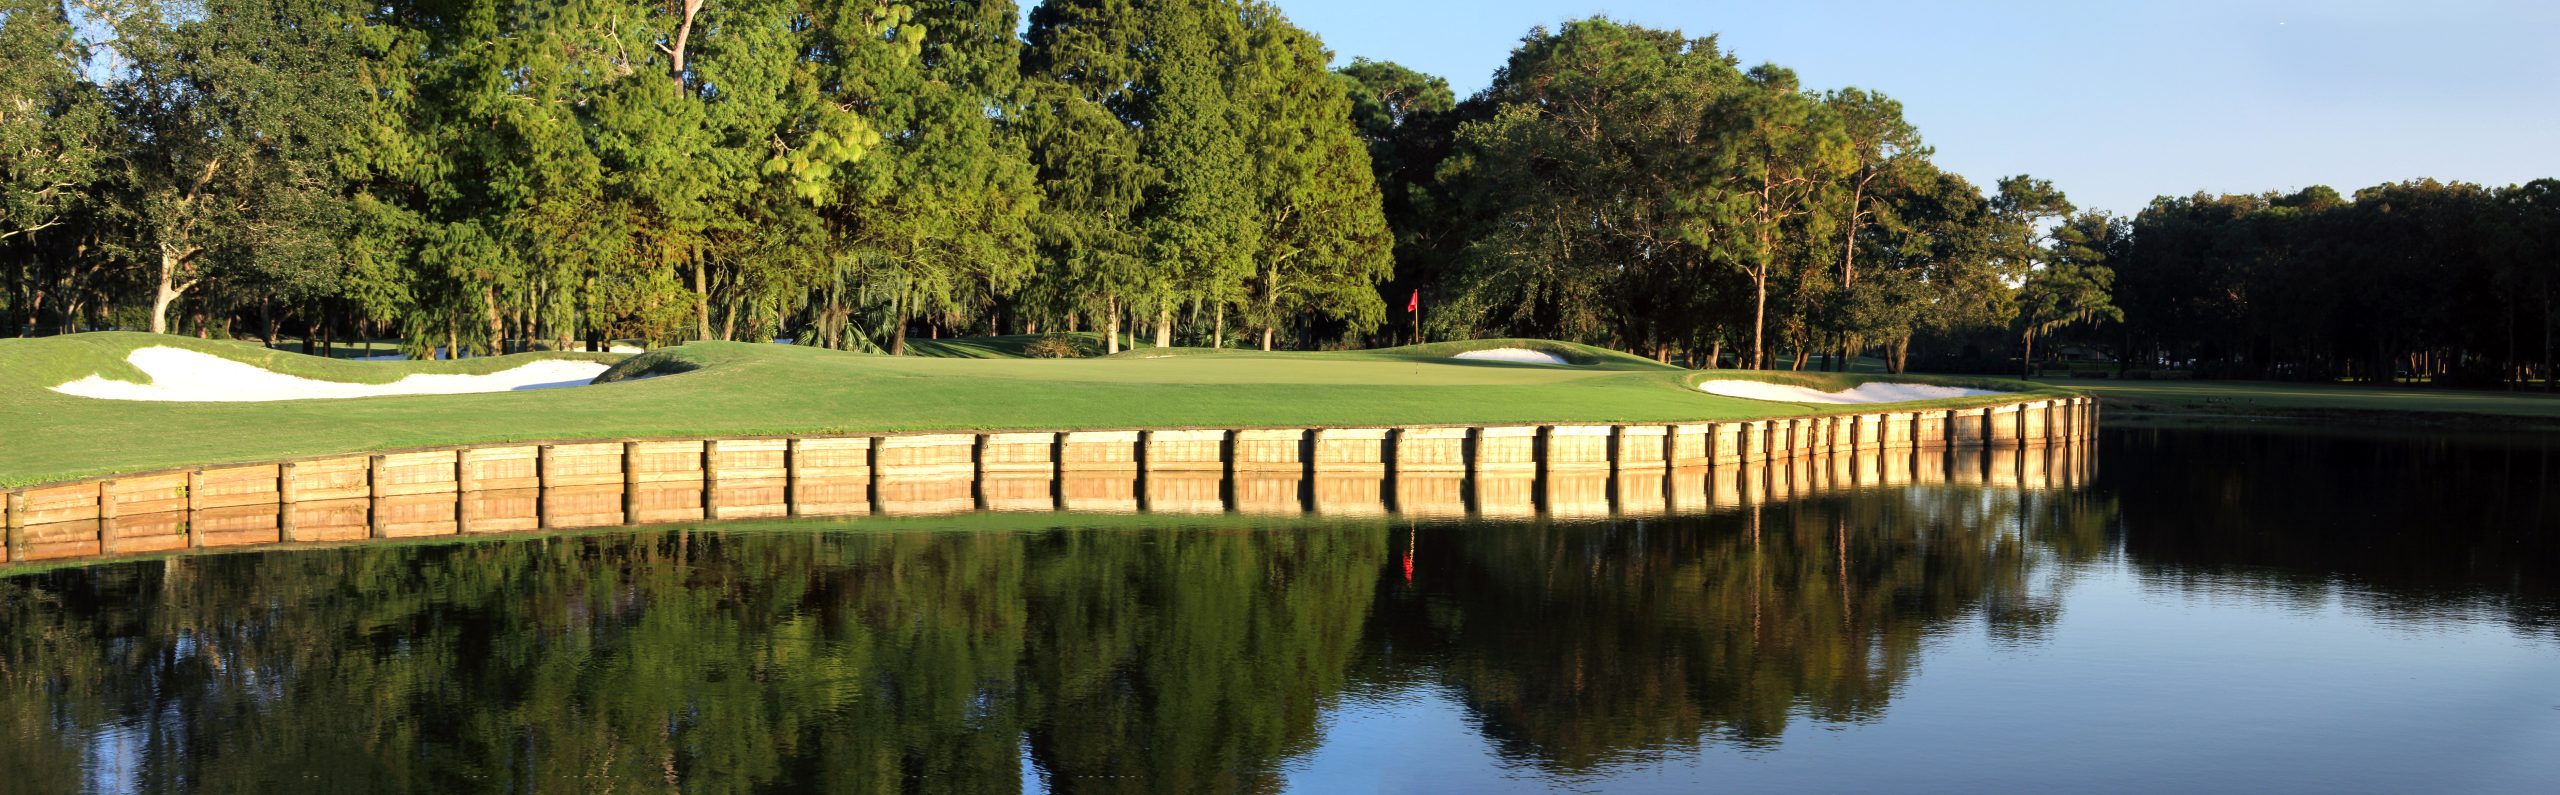 Wooden cladded greens on a lakeside, with bushy tree reflections at Innisbrook Golf Resort, Florida